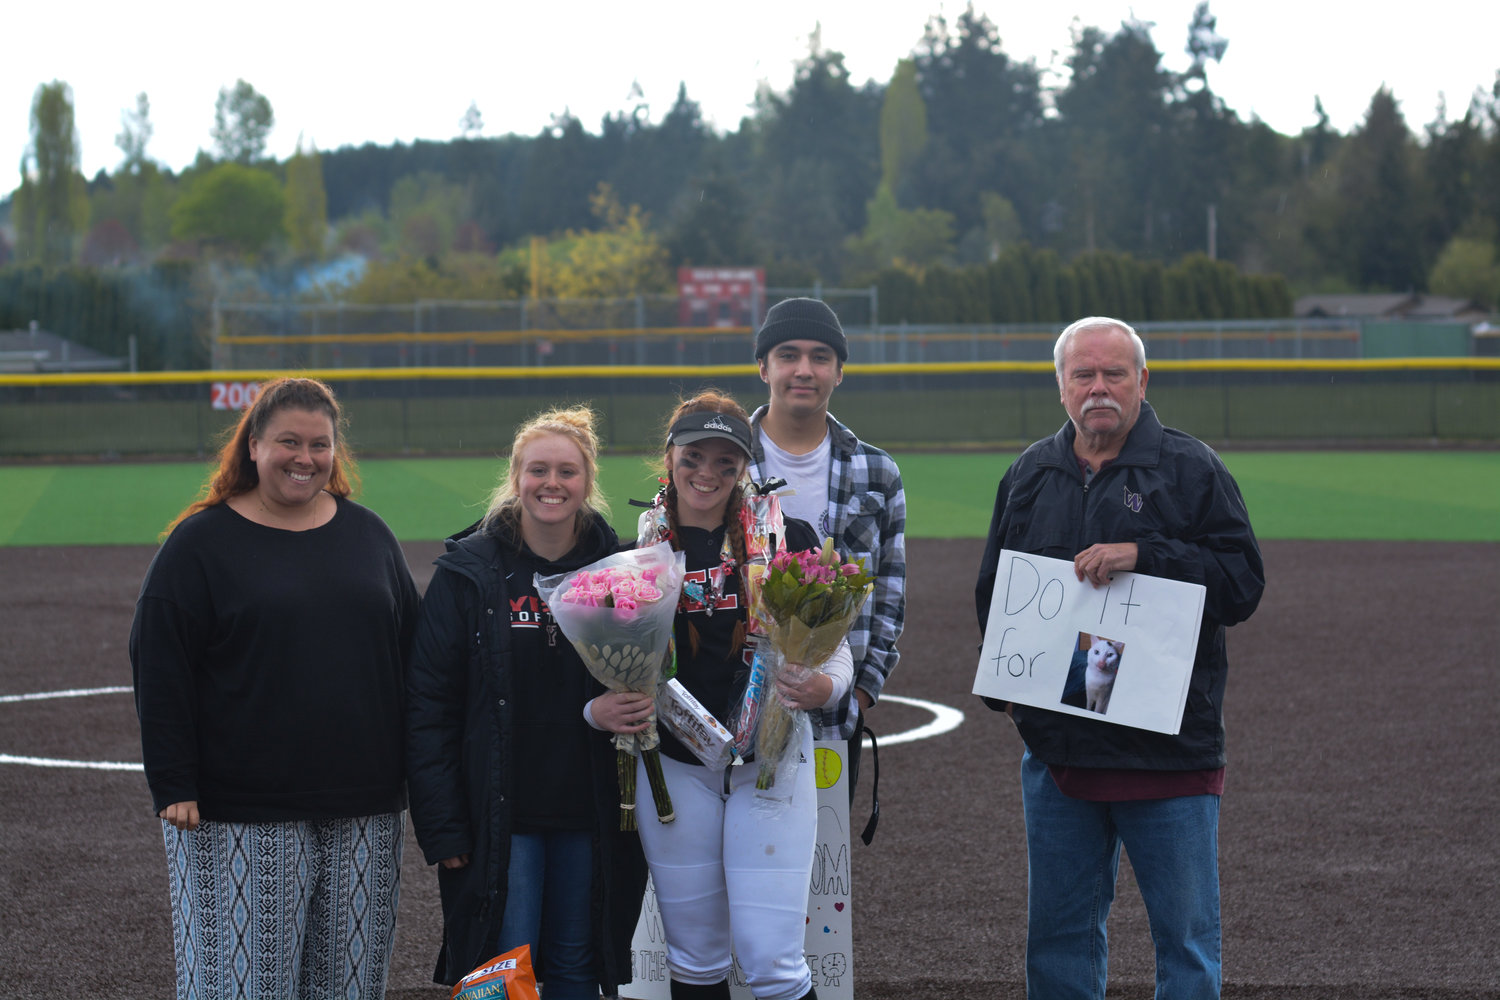 Senior pitcher Vivian Watts poses with her family following the Senior Night outing on May 9.